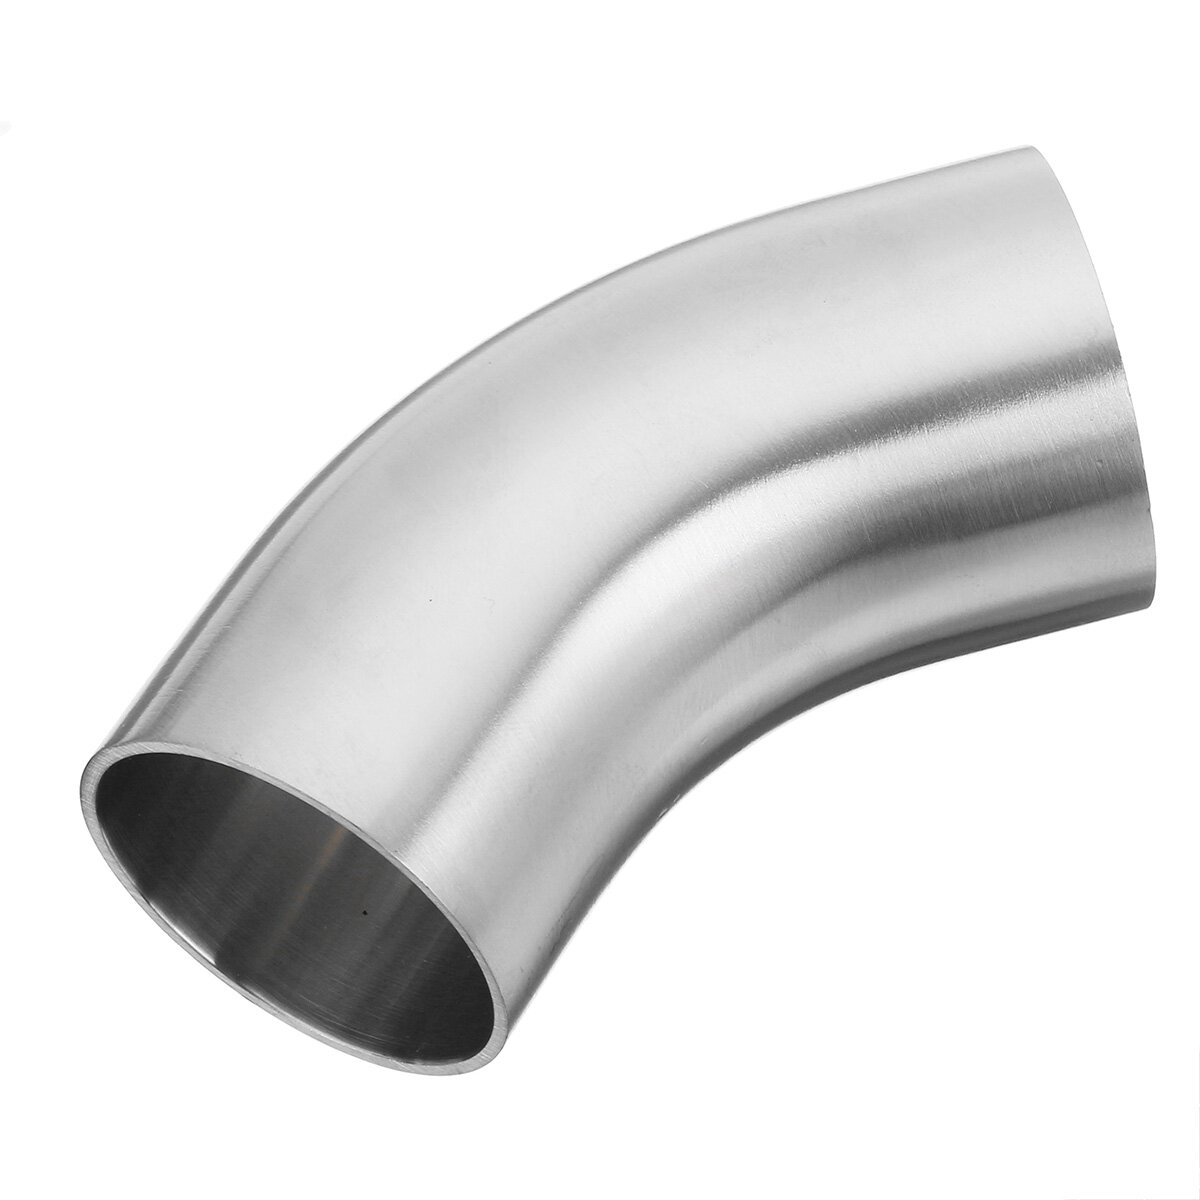 1.5 / 2 / 2.5 / 3'' OD 45 Degree Exhaust Pipe Bends Tube ElbowsStainless Steel